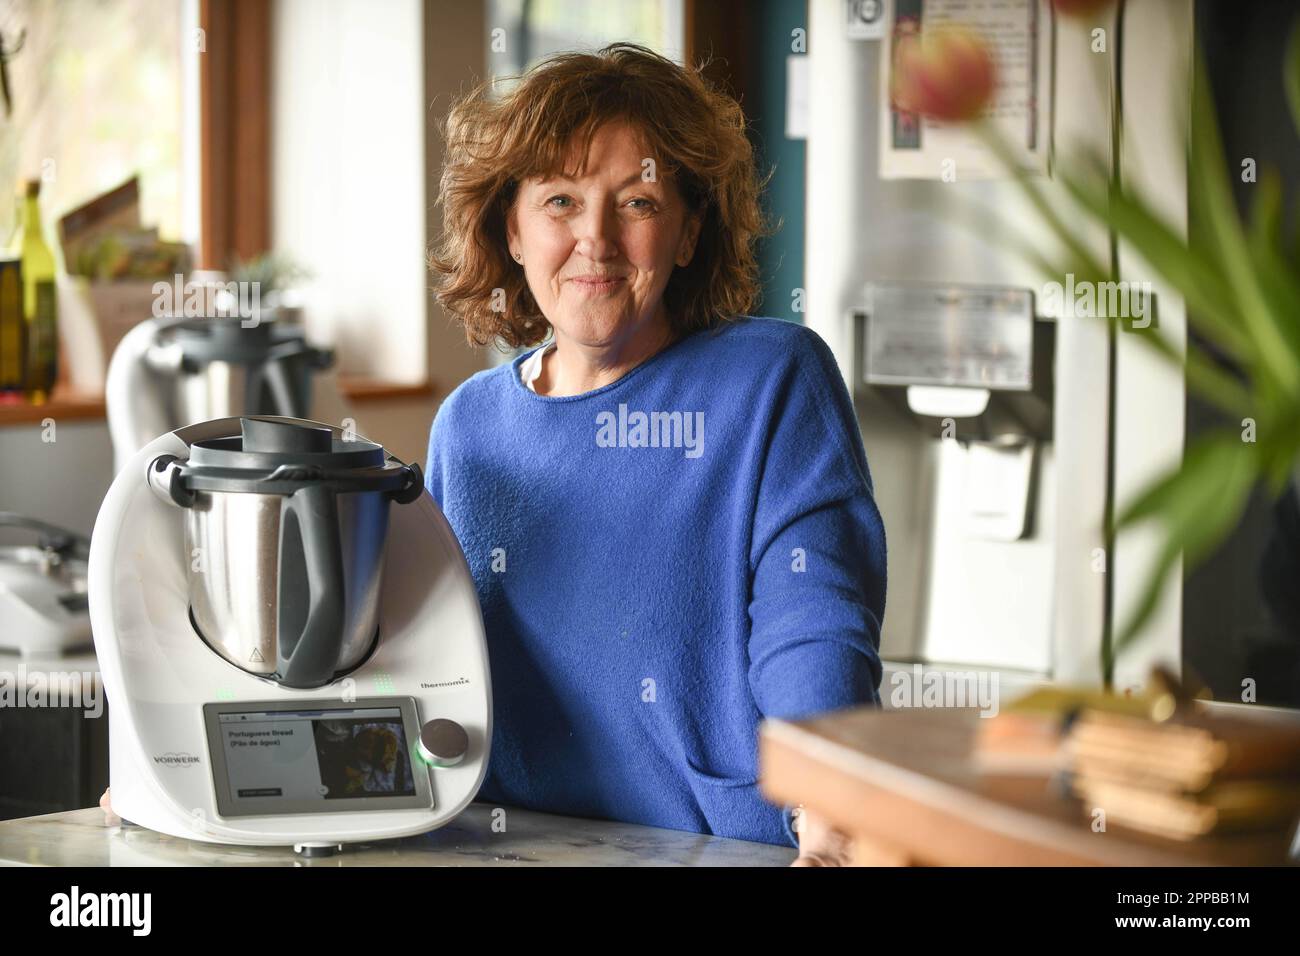 https://c8.alamy.com/comp/2PPBB1M/upper-cwmtwrch-swansea-14th-march-2023-pictured-at-her-home-in-upper-cwmtwrch-near-swansea-is-former-teacher-jayne-clancy-who-is-now-a-team-leader-for-thermomix-2PPBB1M.jpg